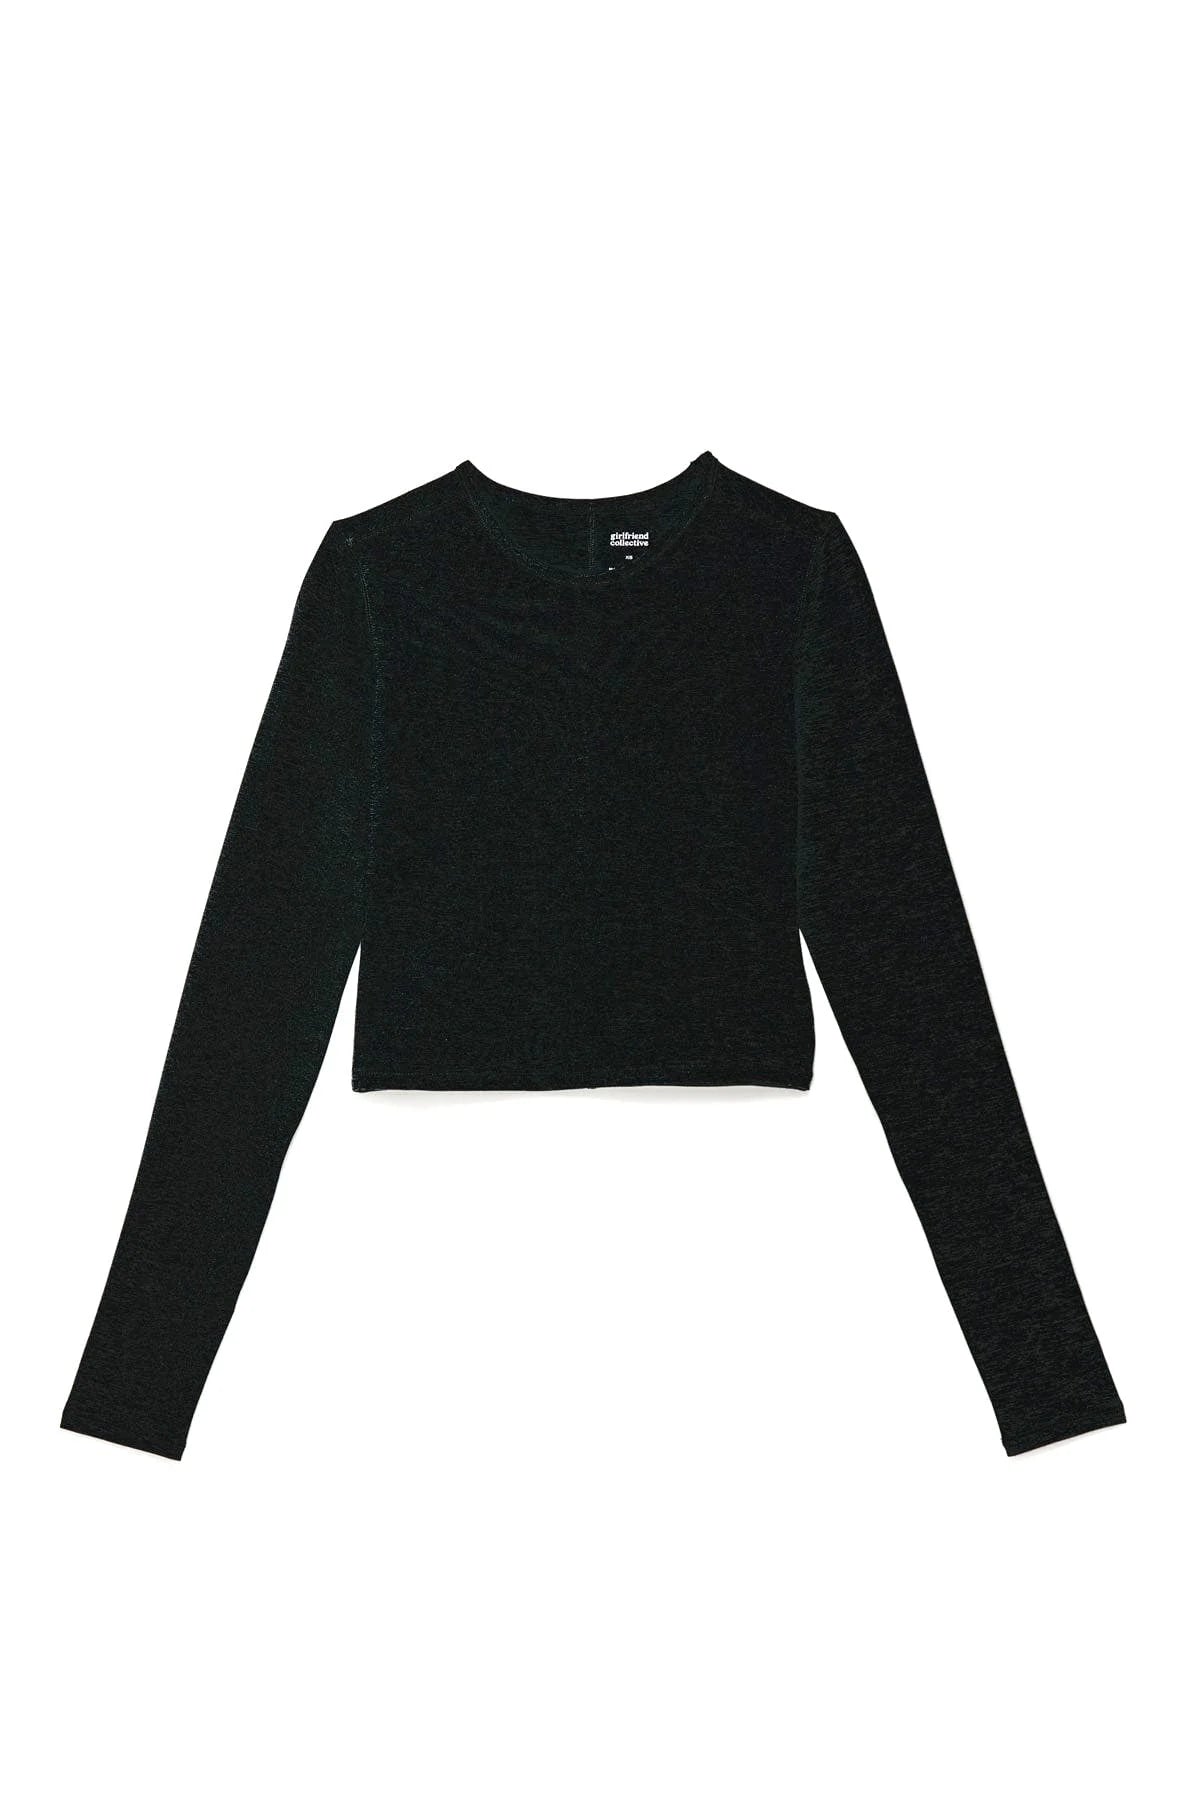 Reset Cropped Long Sleeve Top